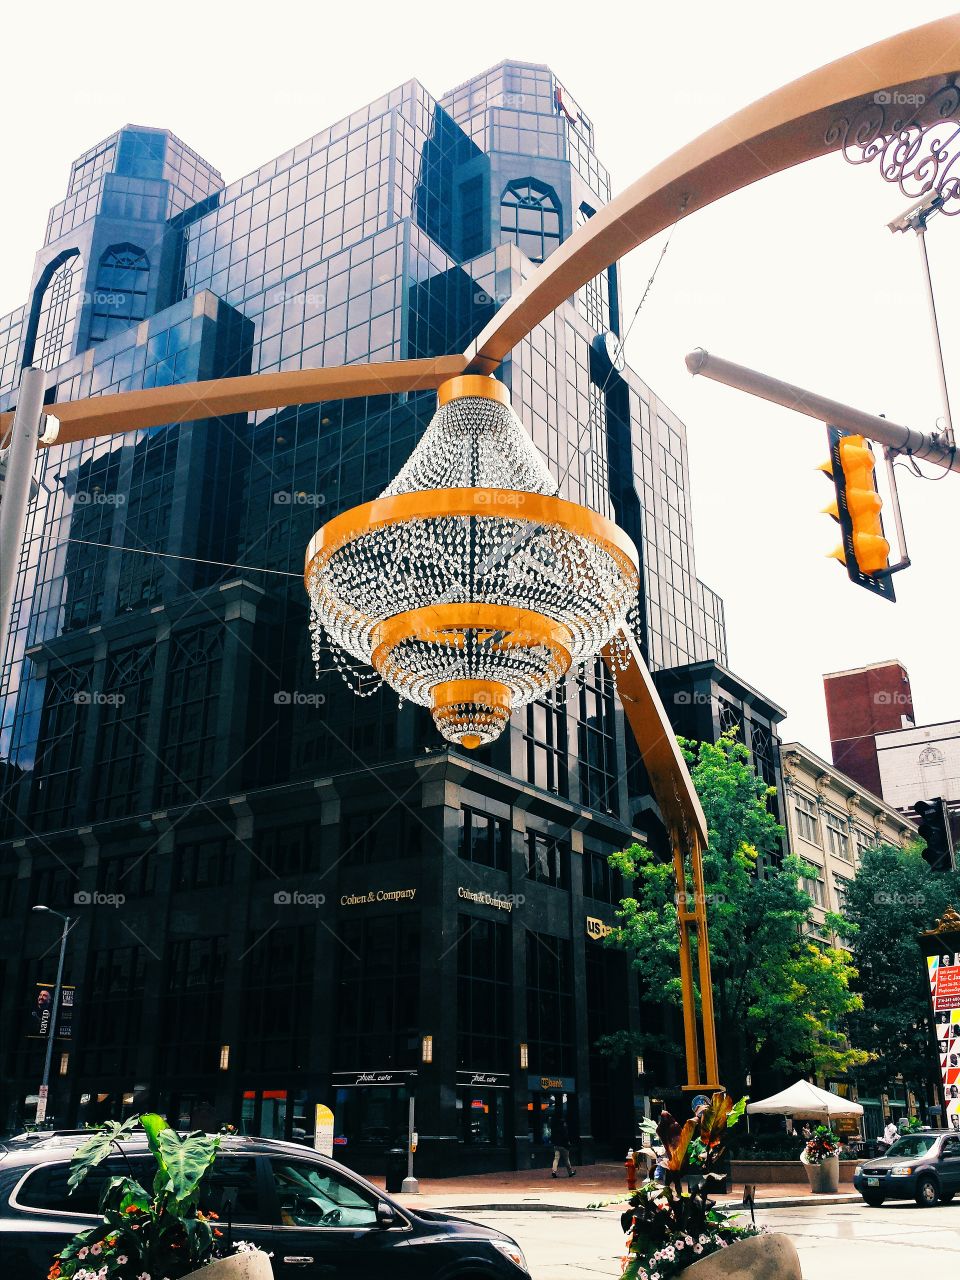 Chandelier at an intersection. Chandelier in the intersection in Cleveland